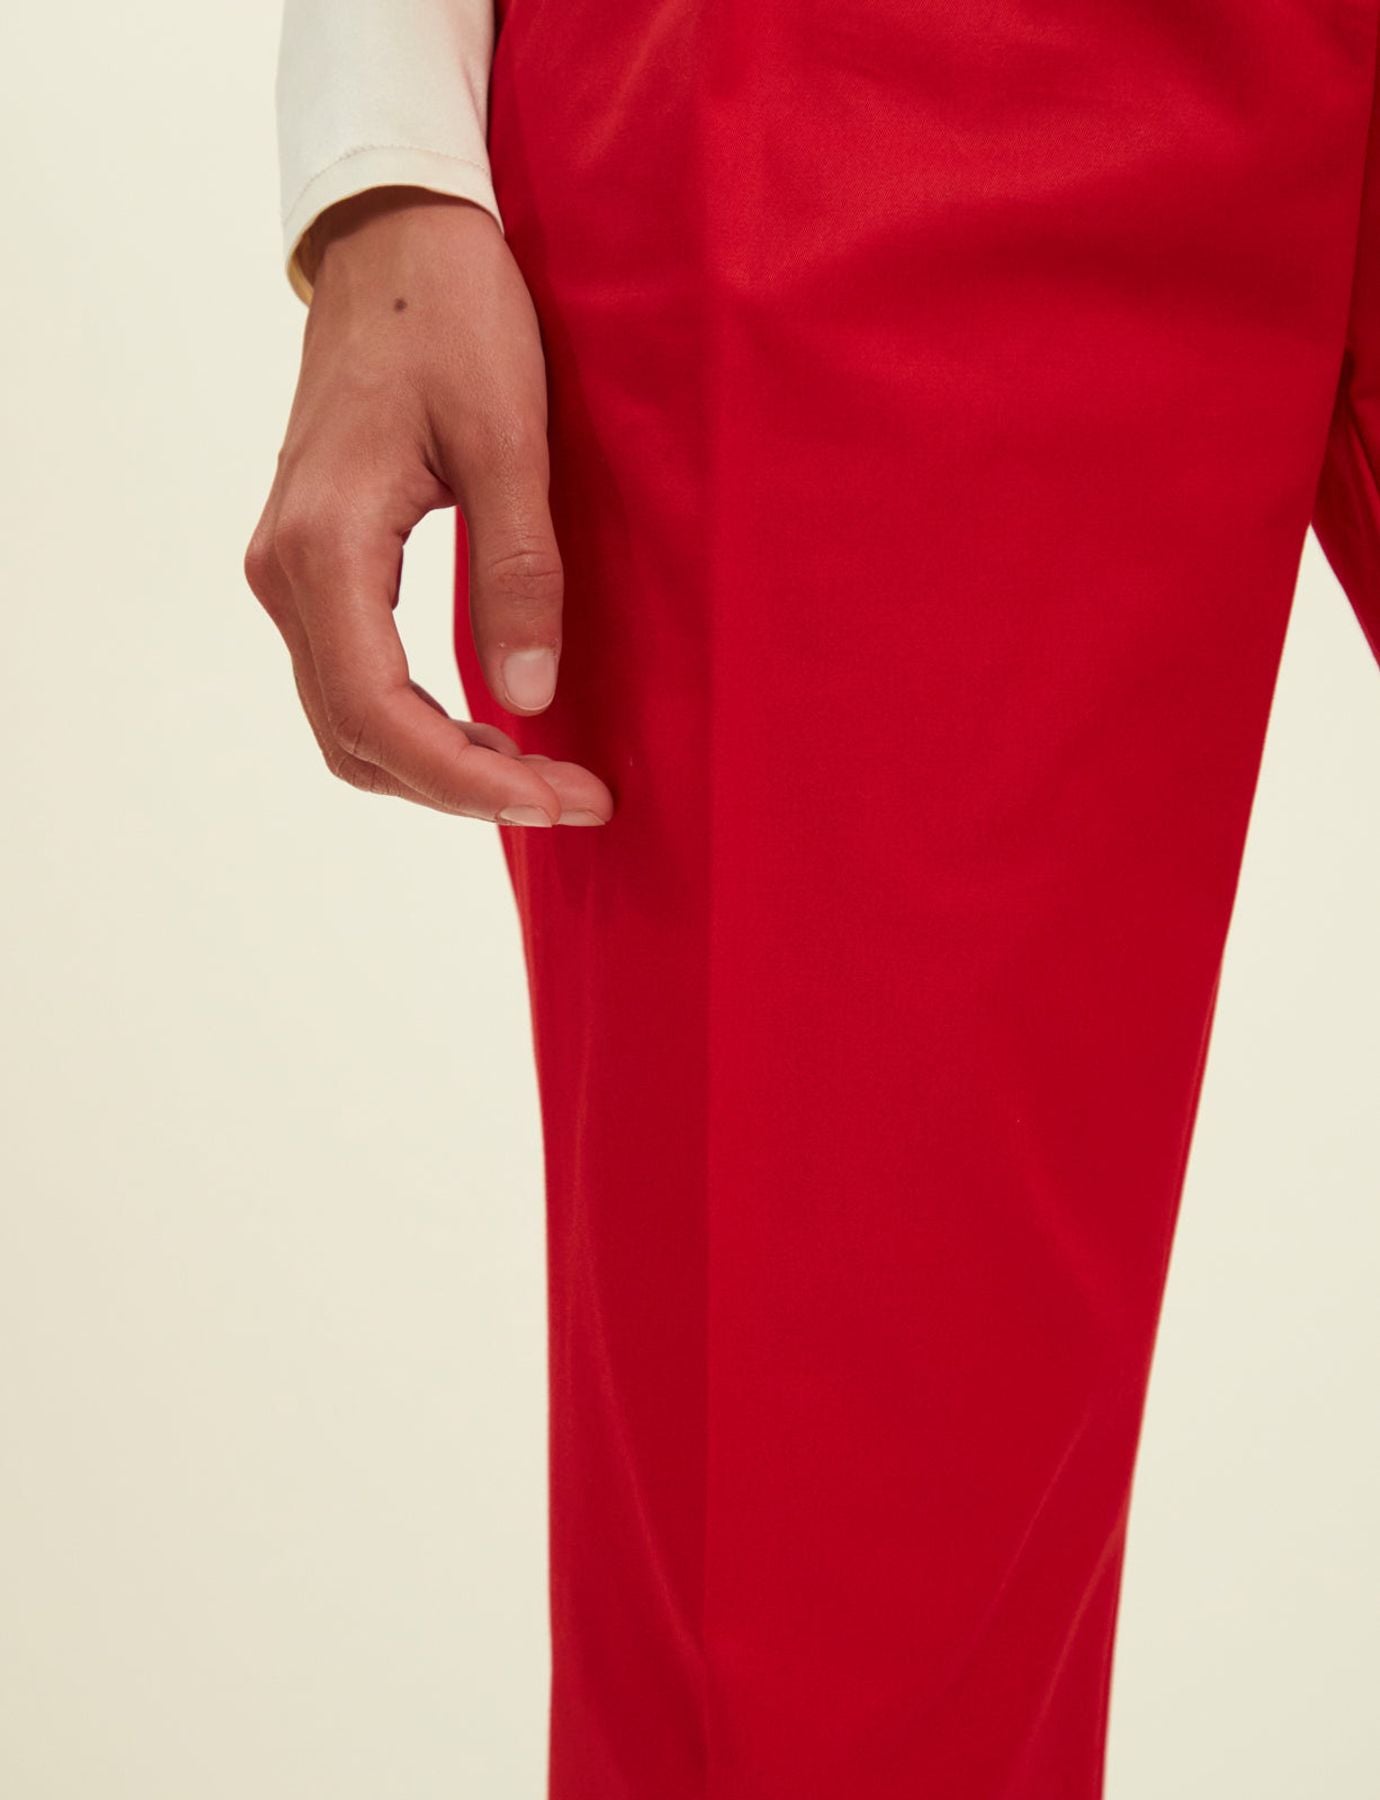 pants-hector-red